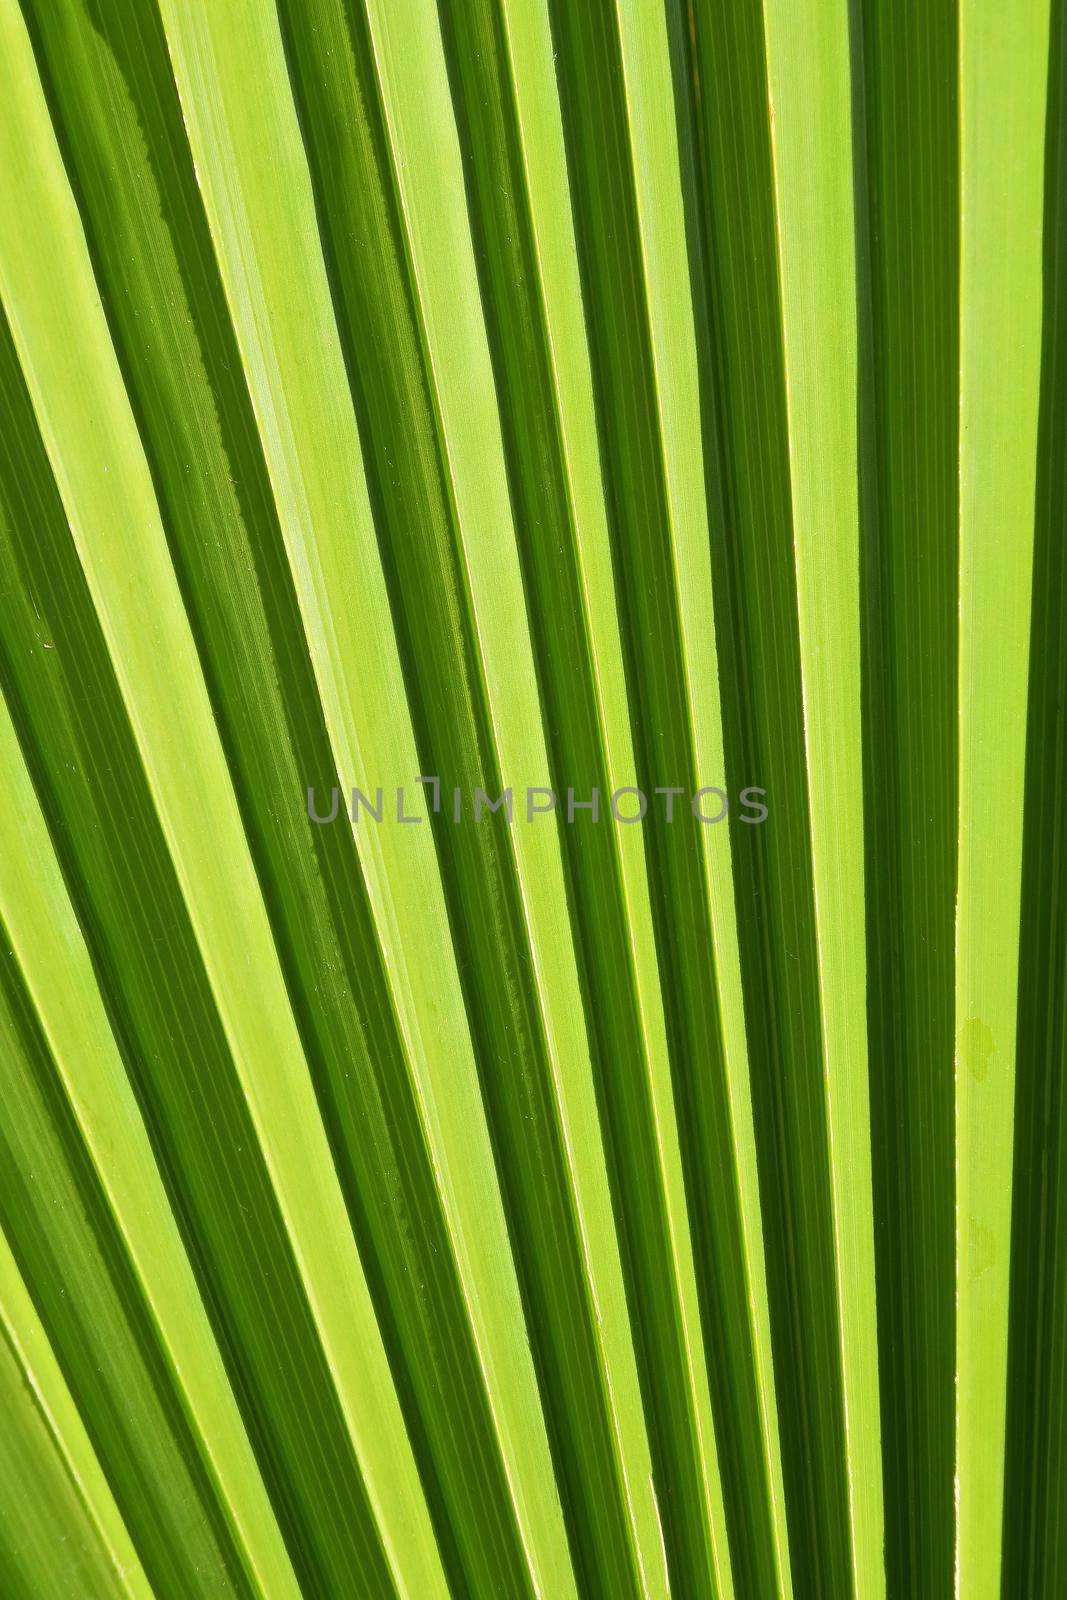 Extreme close up background texture of backlit green palm leaf veins and ribs